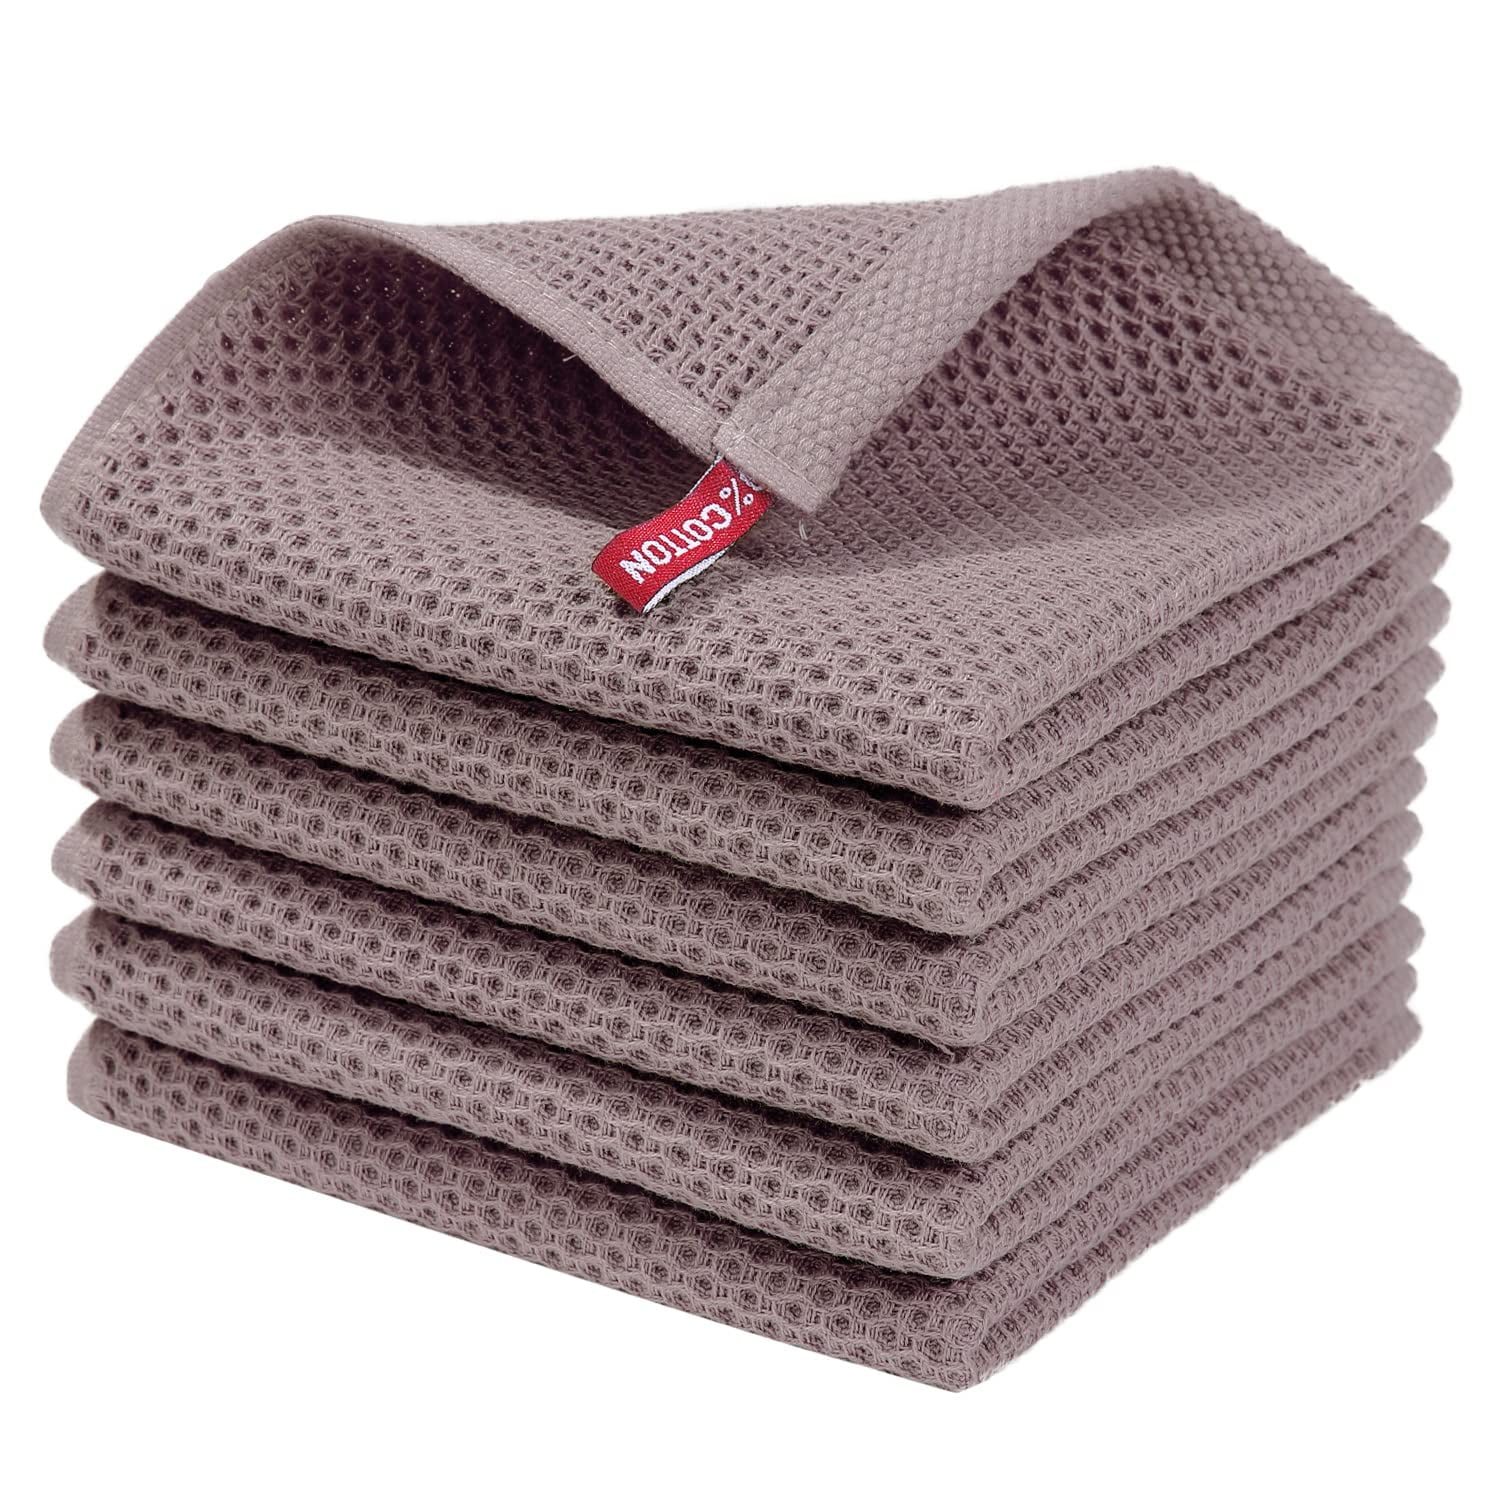 Kitinjoy 100% Cotton Kitchen Dish Cloths, 6 Pack Waffle Weave Ultra Soft  Absorbent Dish Towels for Drying Dishes Quick Drying Kitchen Towels Dish